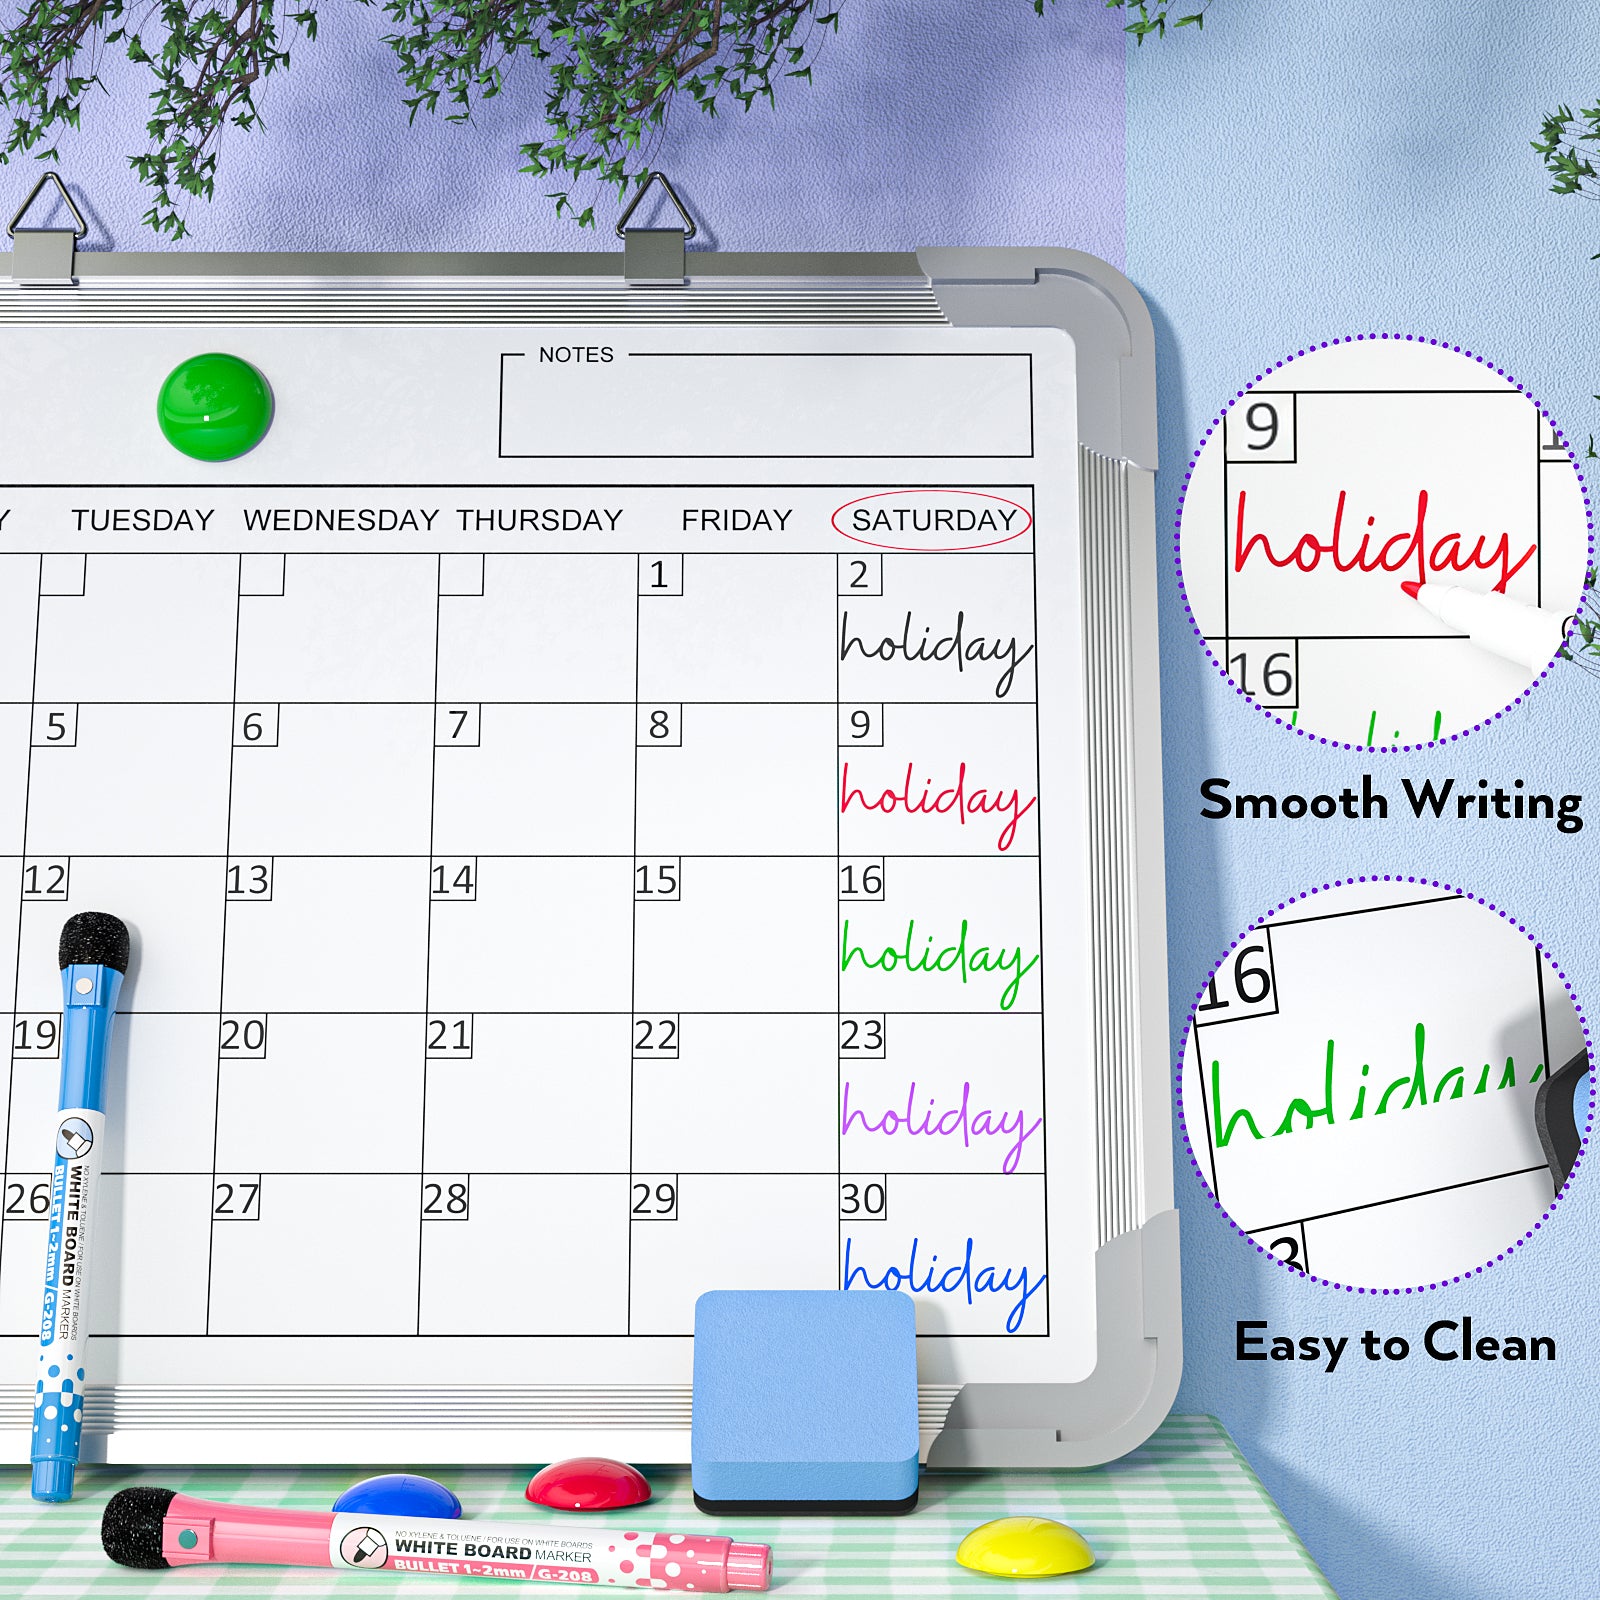 Nicpro Monthly Calendar Dry Erase Whiteboard for Wall, 12 x 16 inch Magnetic Hanging Double-Sided Large White Board with 8 Pens, 1 Eraser, 4 Magnets Portable Board for Planning Memo School Home Office